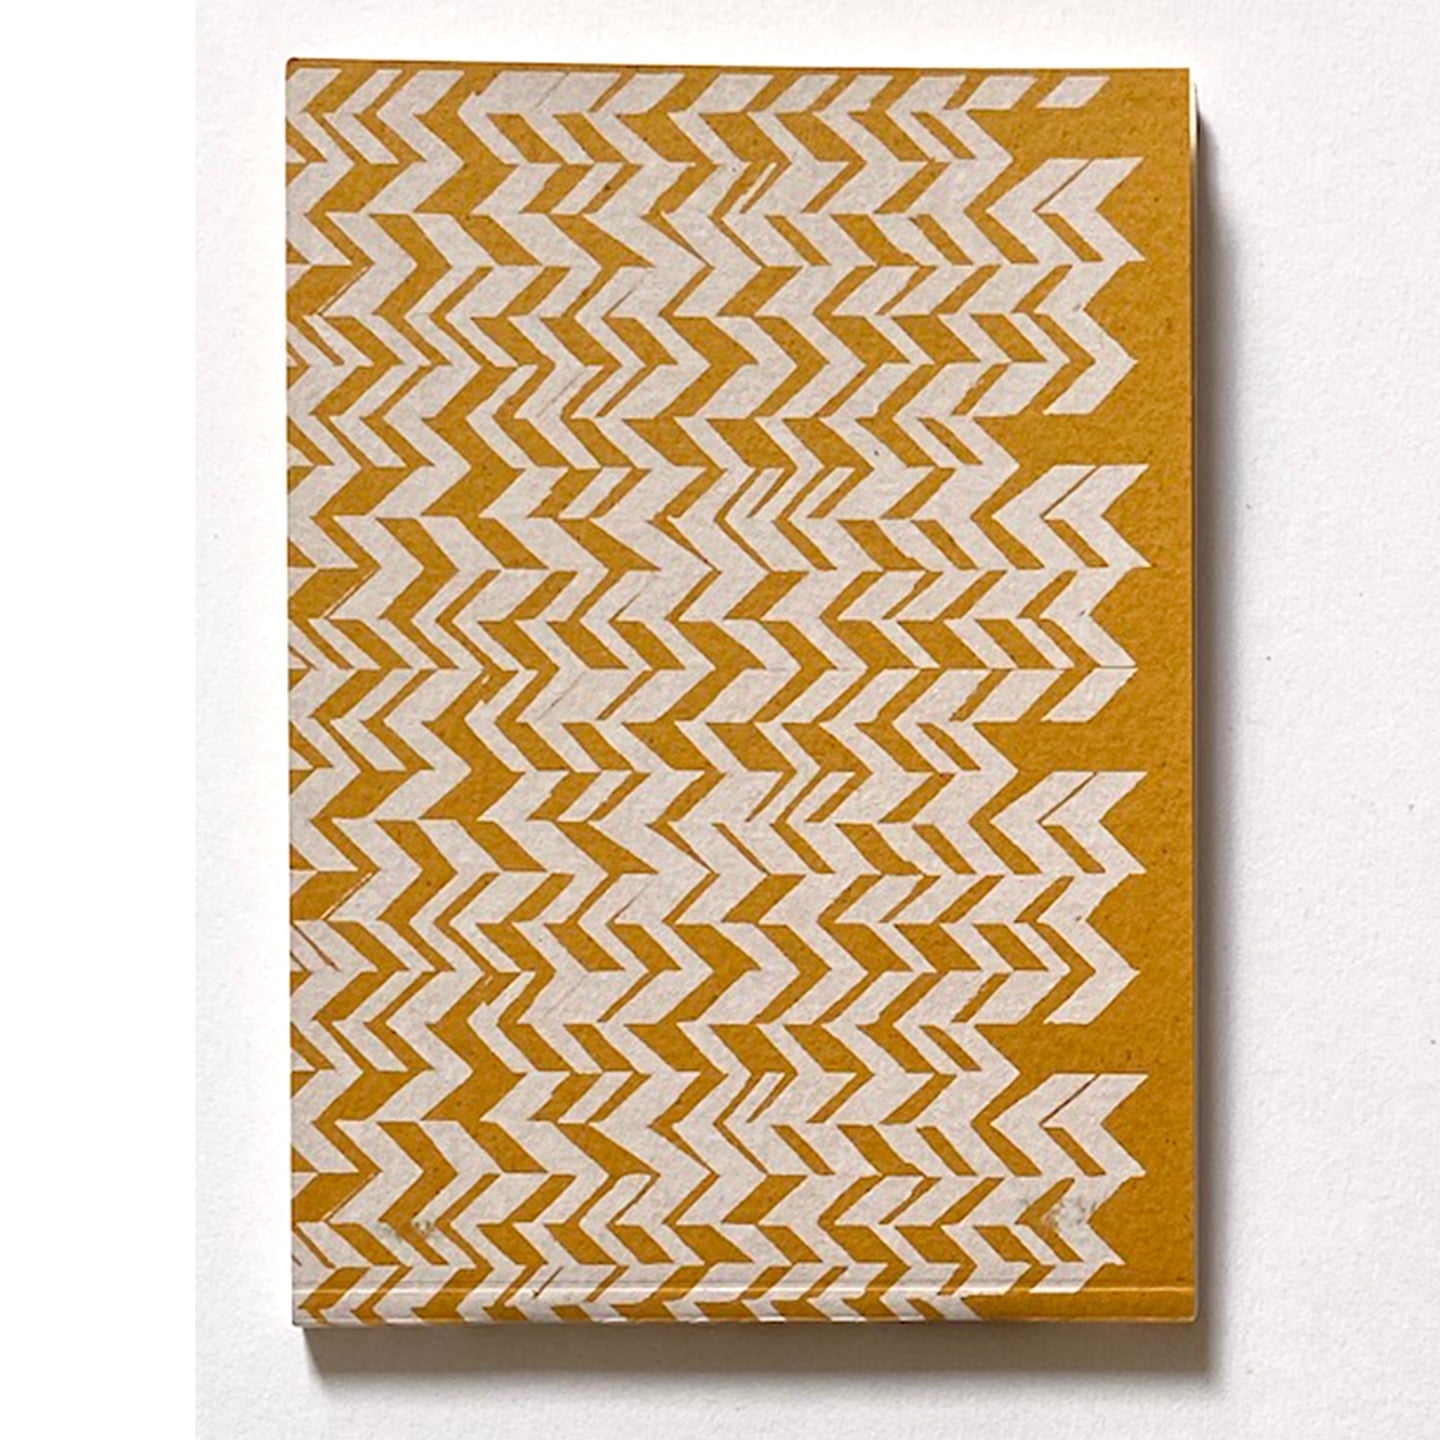 'Chevrons' Hand Printed A6 note book